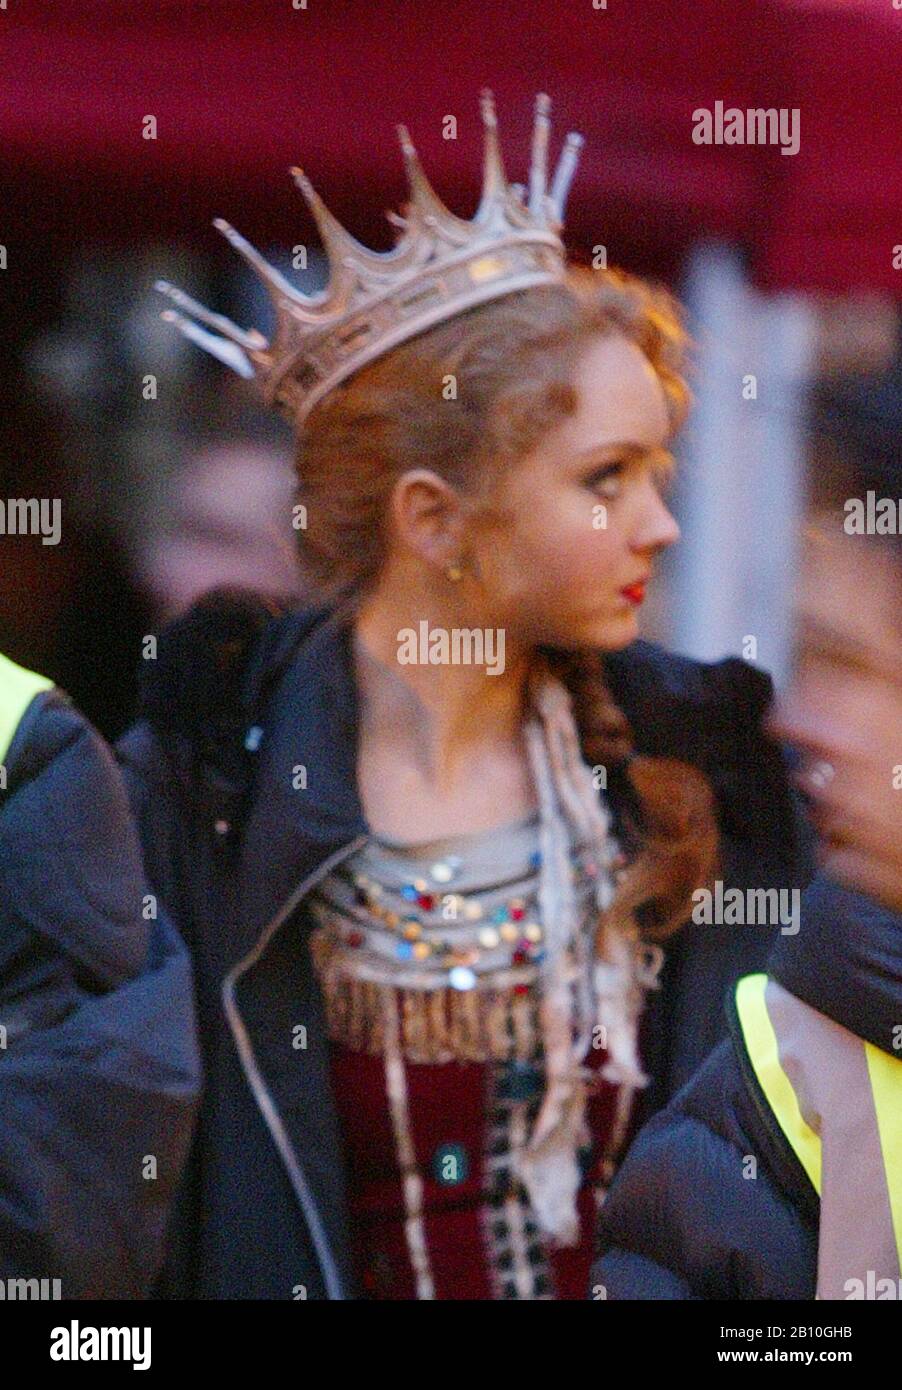 SUPER MODEL LILY COLE PLAYING VALENTINA ON SET OF TERRY GILLIAMS FILM 'THE IMAGINARIUM OF DR PARNASSUS'  SCENE SHOT IN CLERCKENWELL LONDON Stock Photo